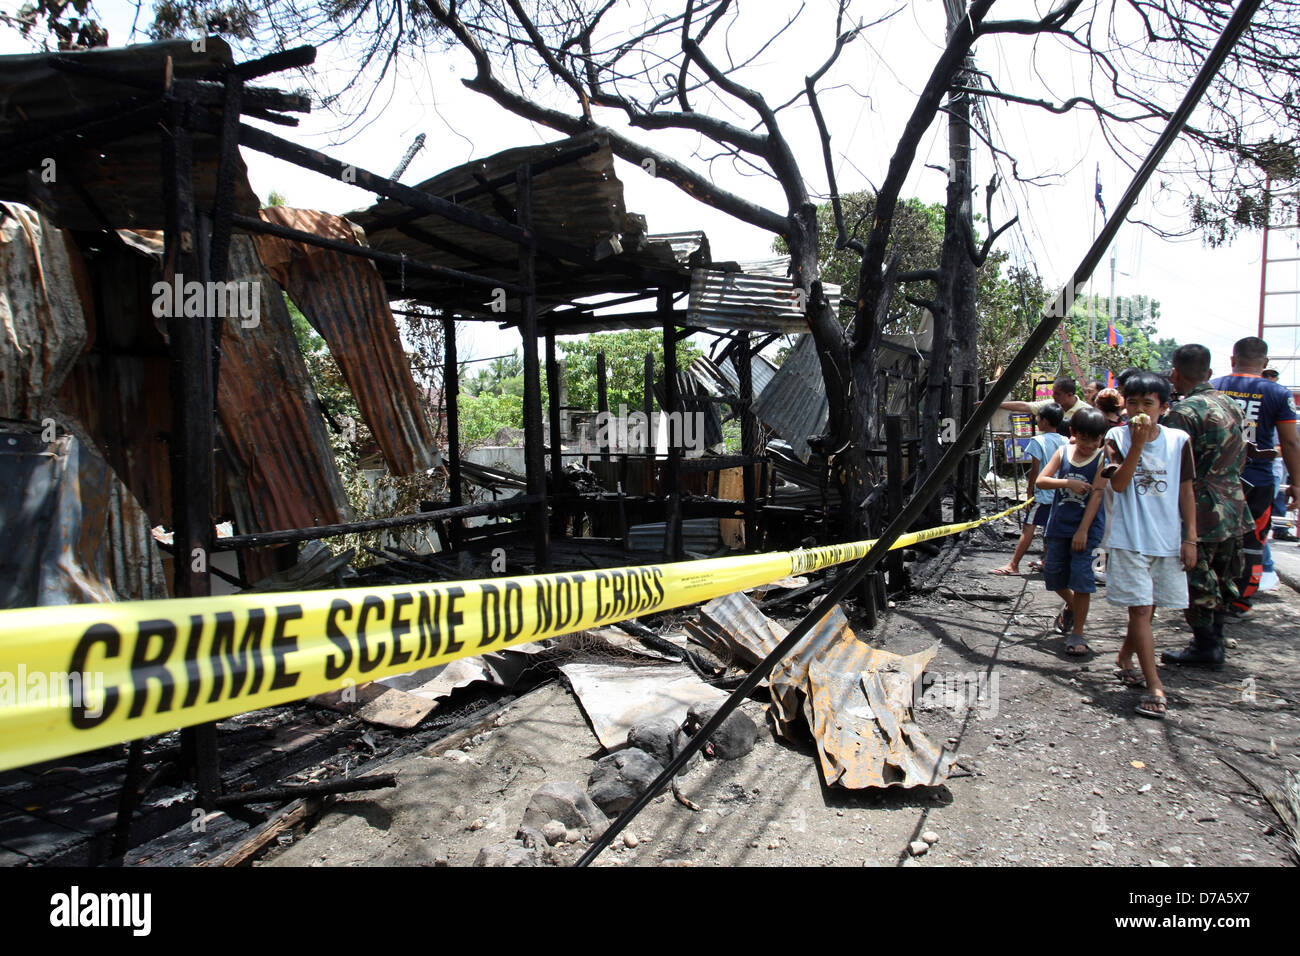 SULTAN KUDARAT, PHILIPPINES, 2nd May, 2013. Filipino fire marshals inspect the razed provincial headquarters of Philippine President Benigno Aquino III’s Liberal Party in the southern Philippine township of Sultan Kudarat town in Maguindanao, May, 2, 2013.  Unidentified men on Wednesday night set afire the building but no casulaty was reported.On May 13, 2013, the Philippines will hold congressional and local elections. Previous elections in the country have been marred by violence, especially in rural areas awash in weapons and private militias. In 2009, 58 people, including 32 media workers, Stock Photo